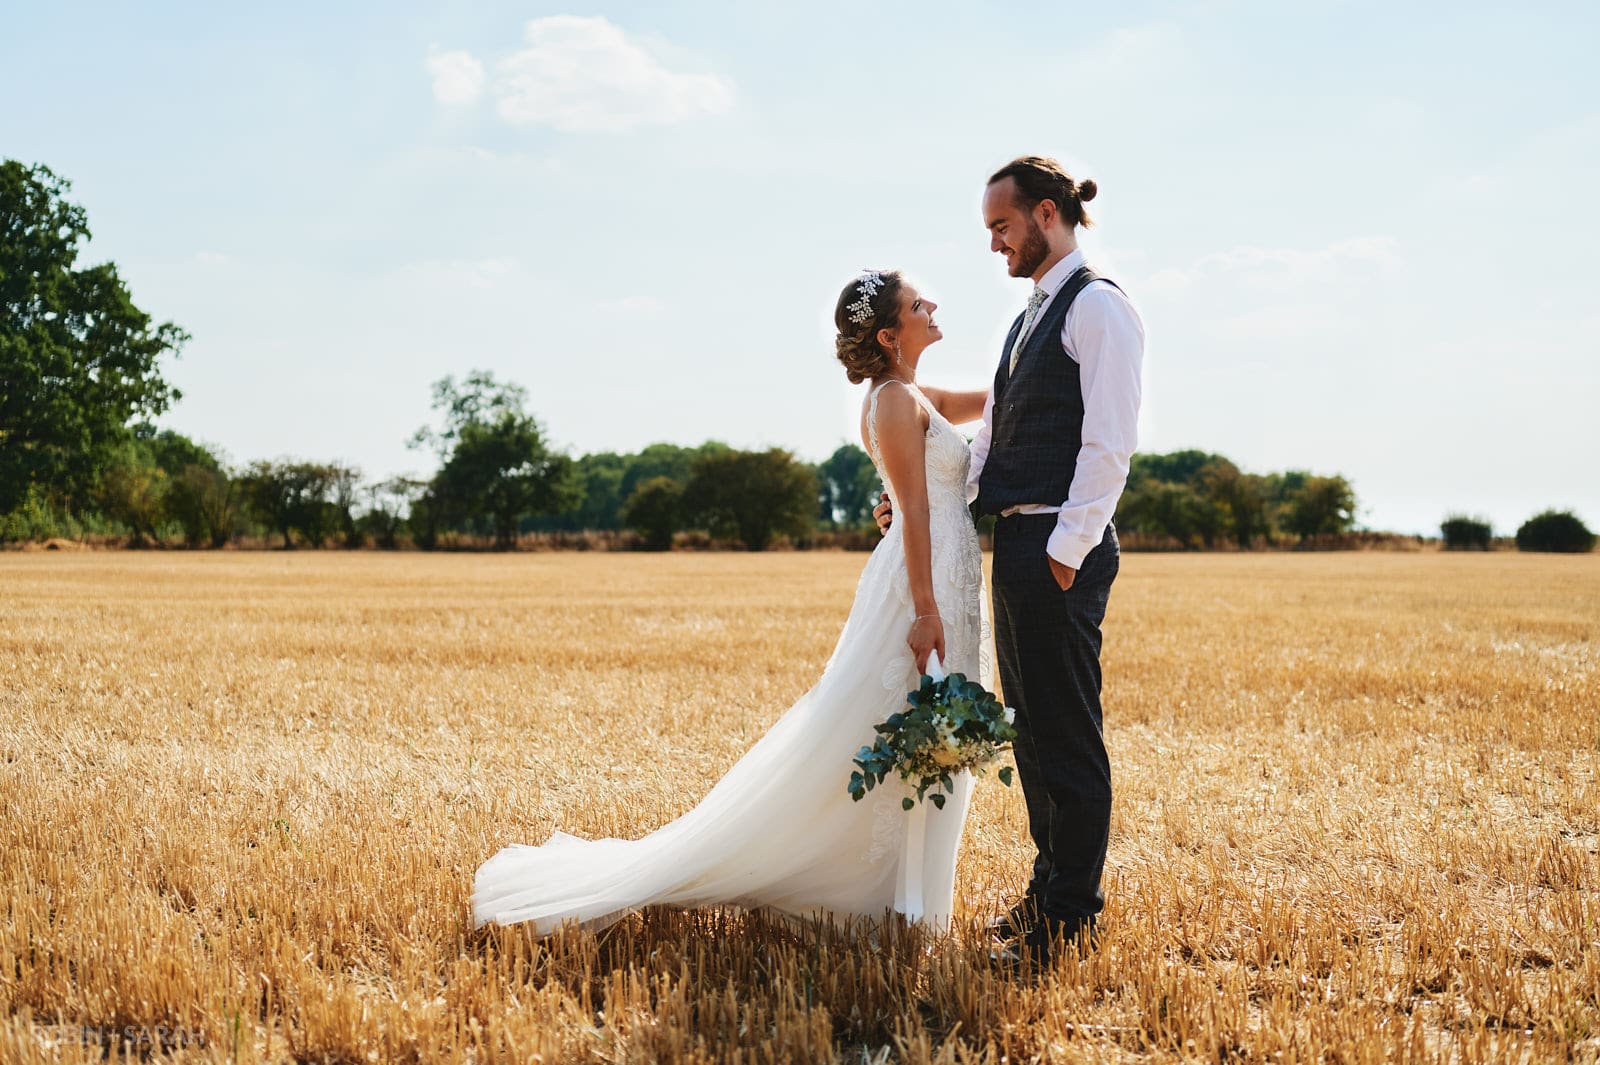 Bride and groom in field on bright sunny day